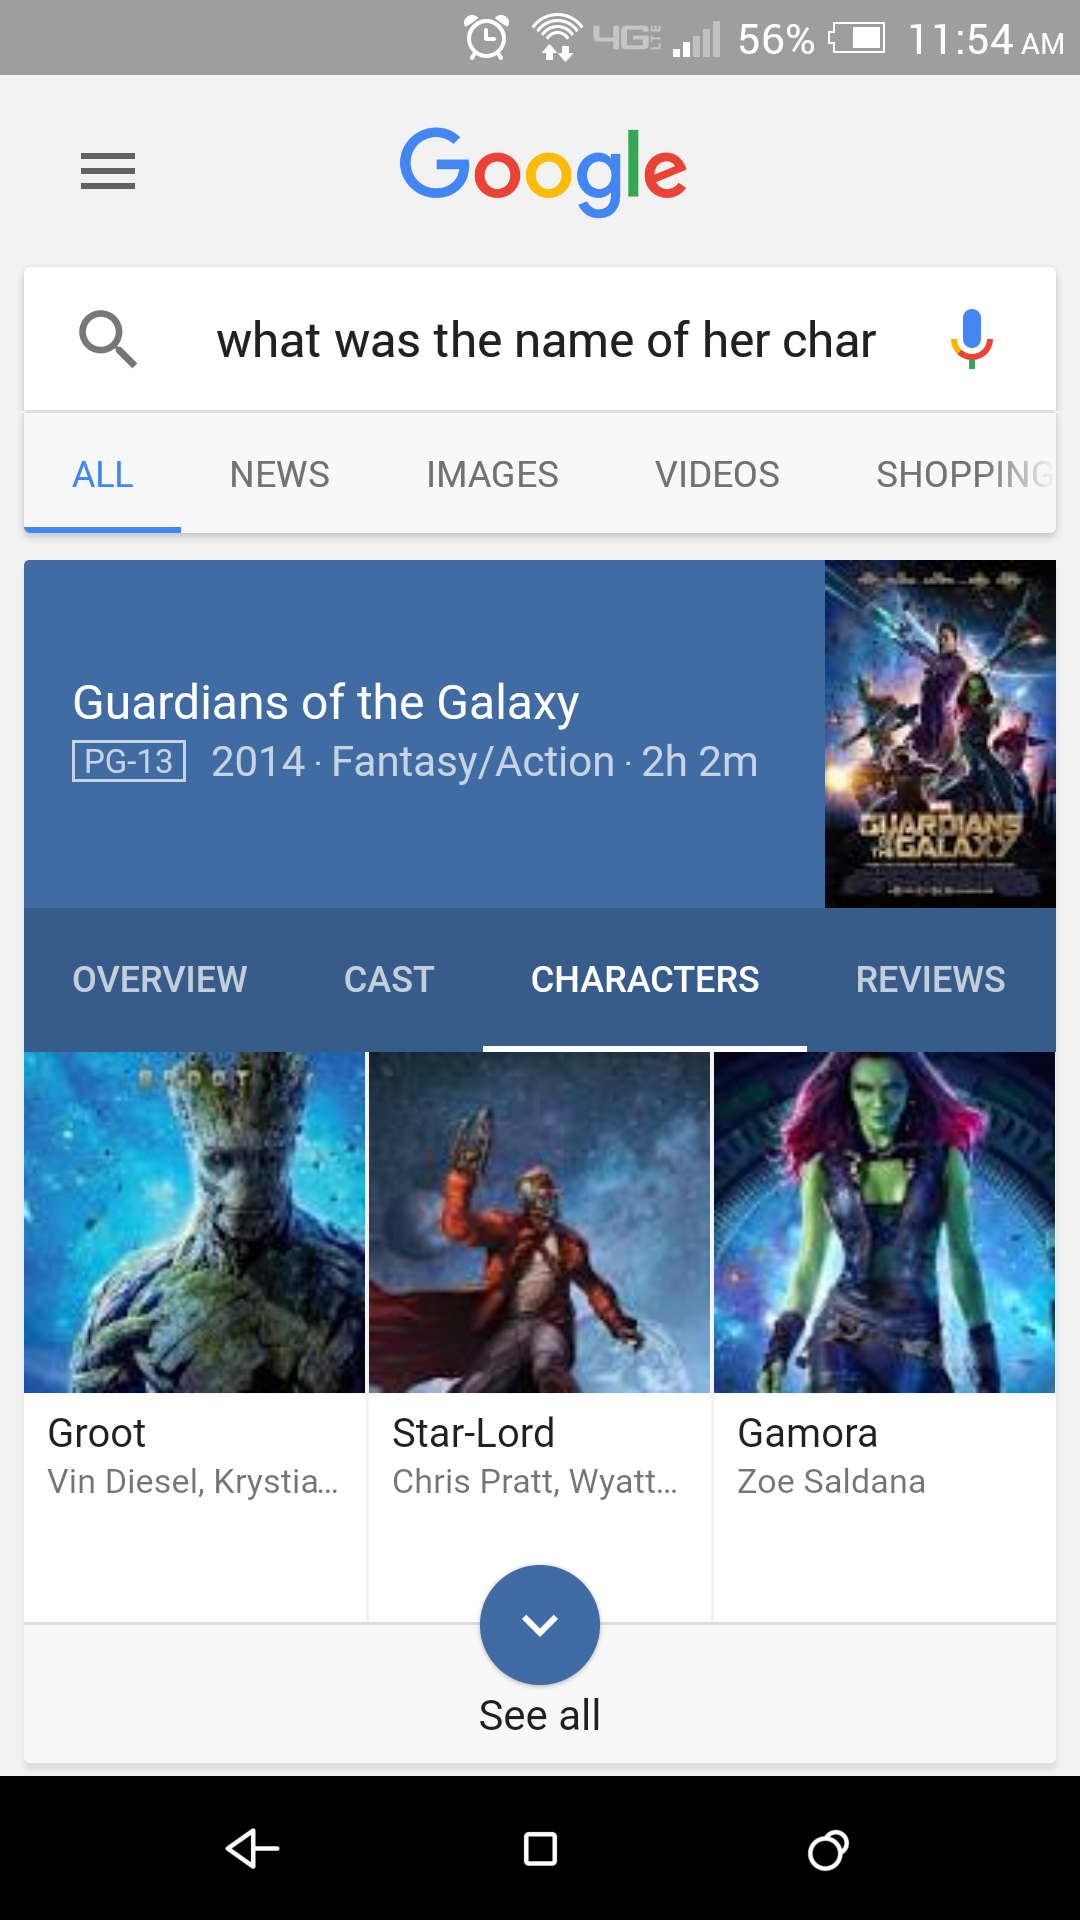 Google Voice Search Zoe Saldanas character in Guardians of the Galaxy